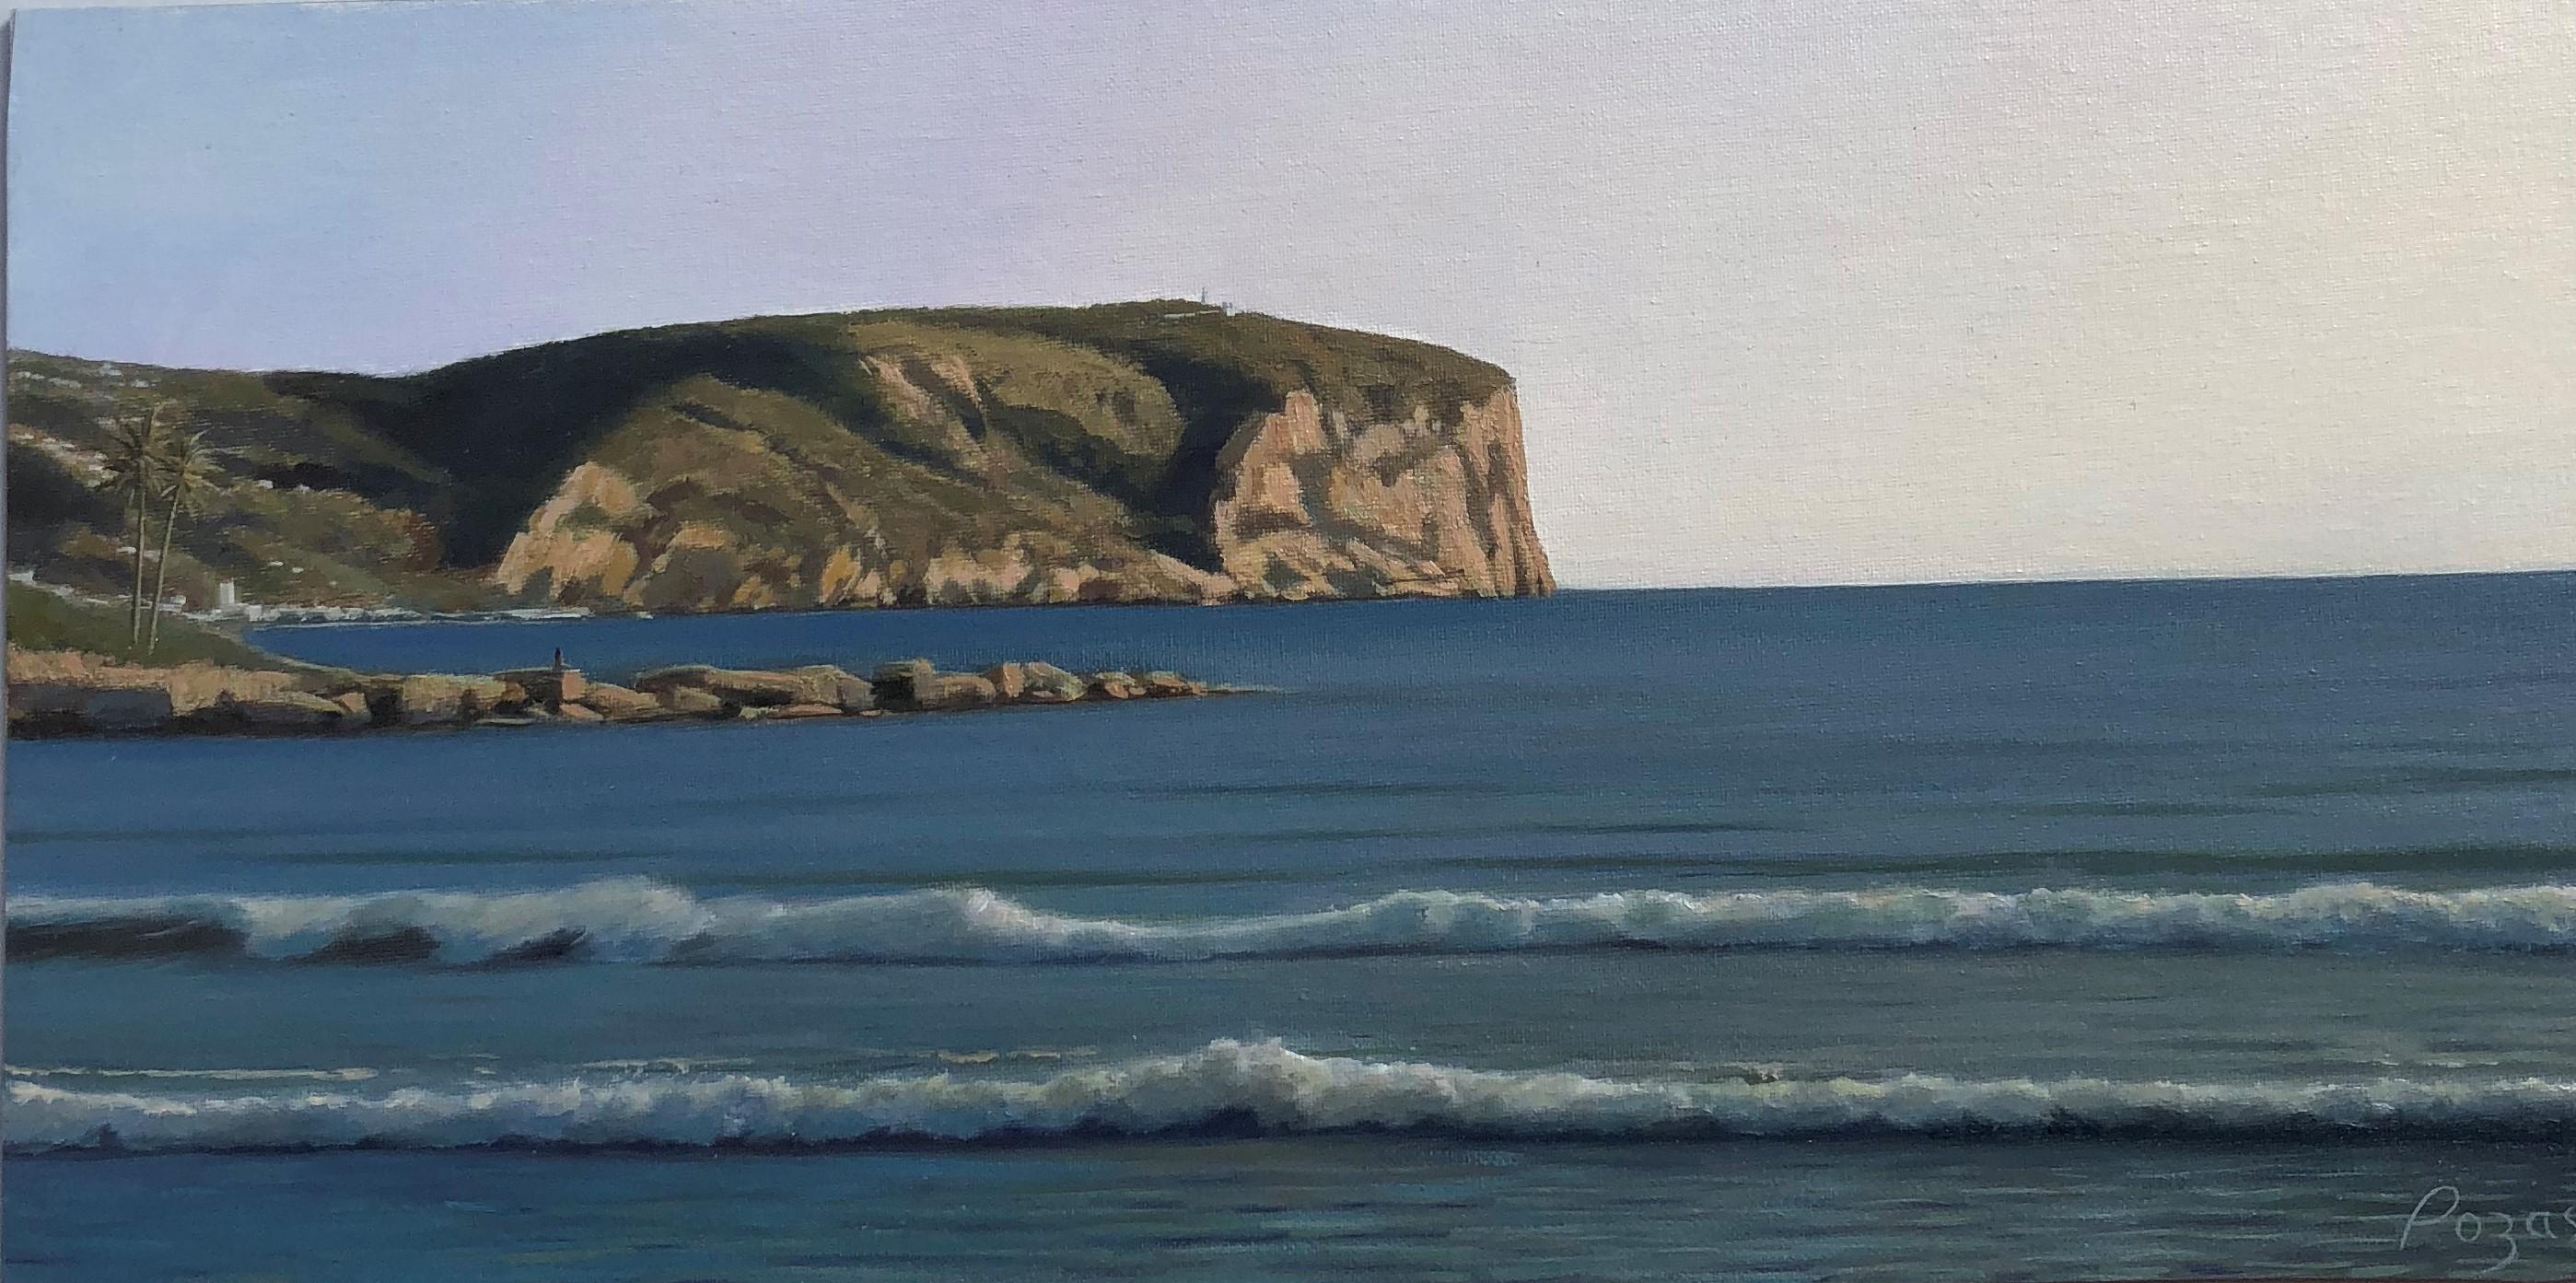 René Monzón Relova “Pozas” Figurative Painting - The First Day, Ocean Waves and Rocky Cliffs, Landscape Painting, Oil on Panel